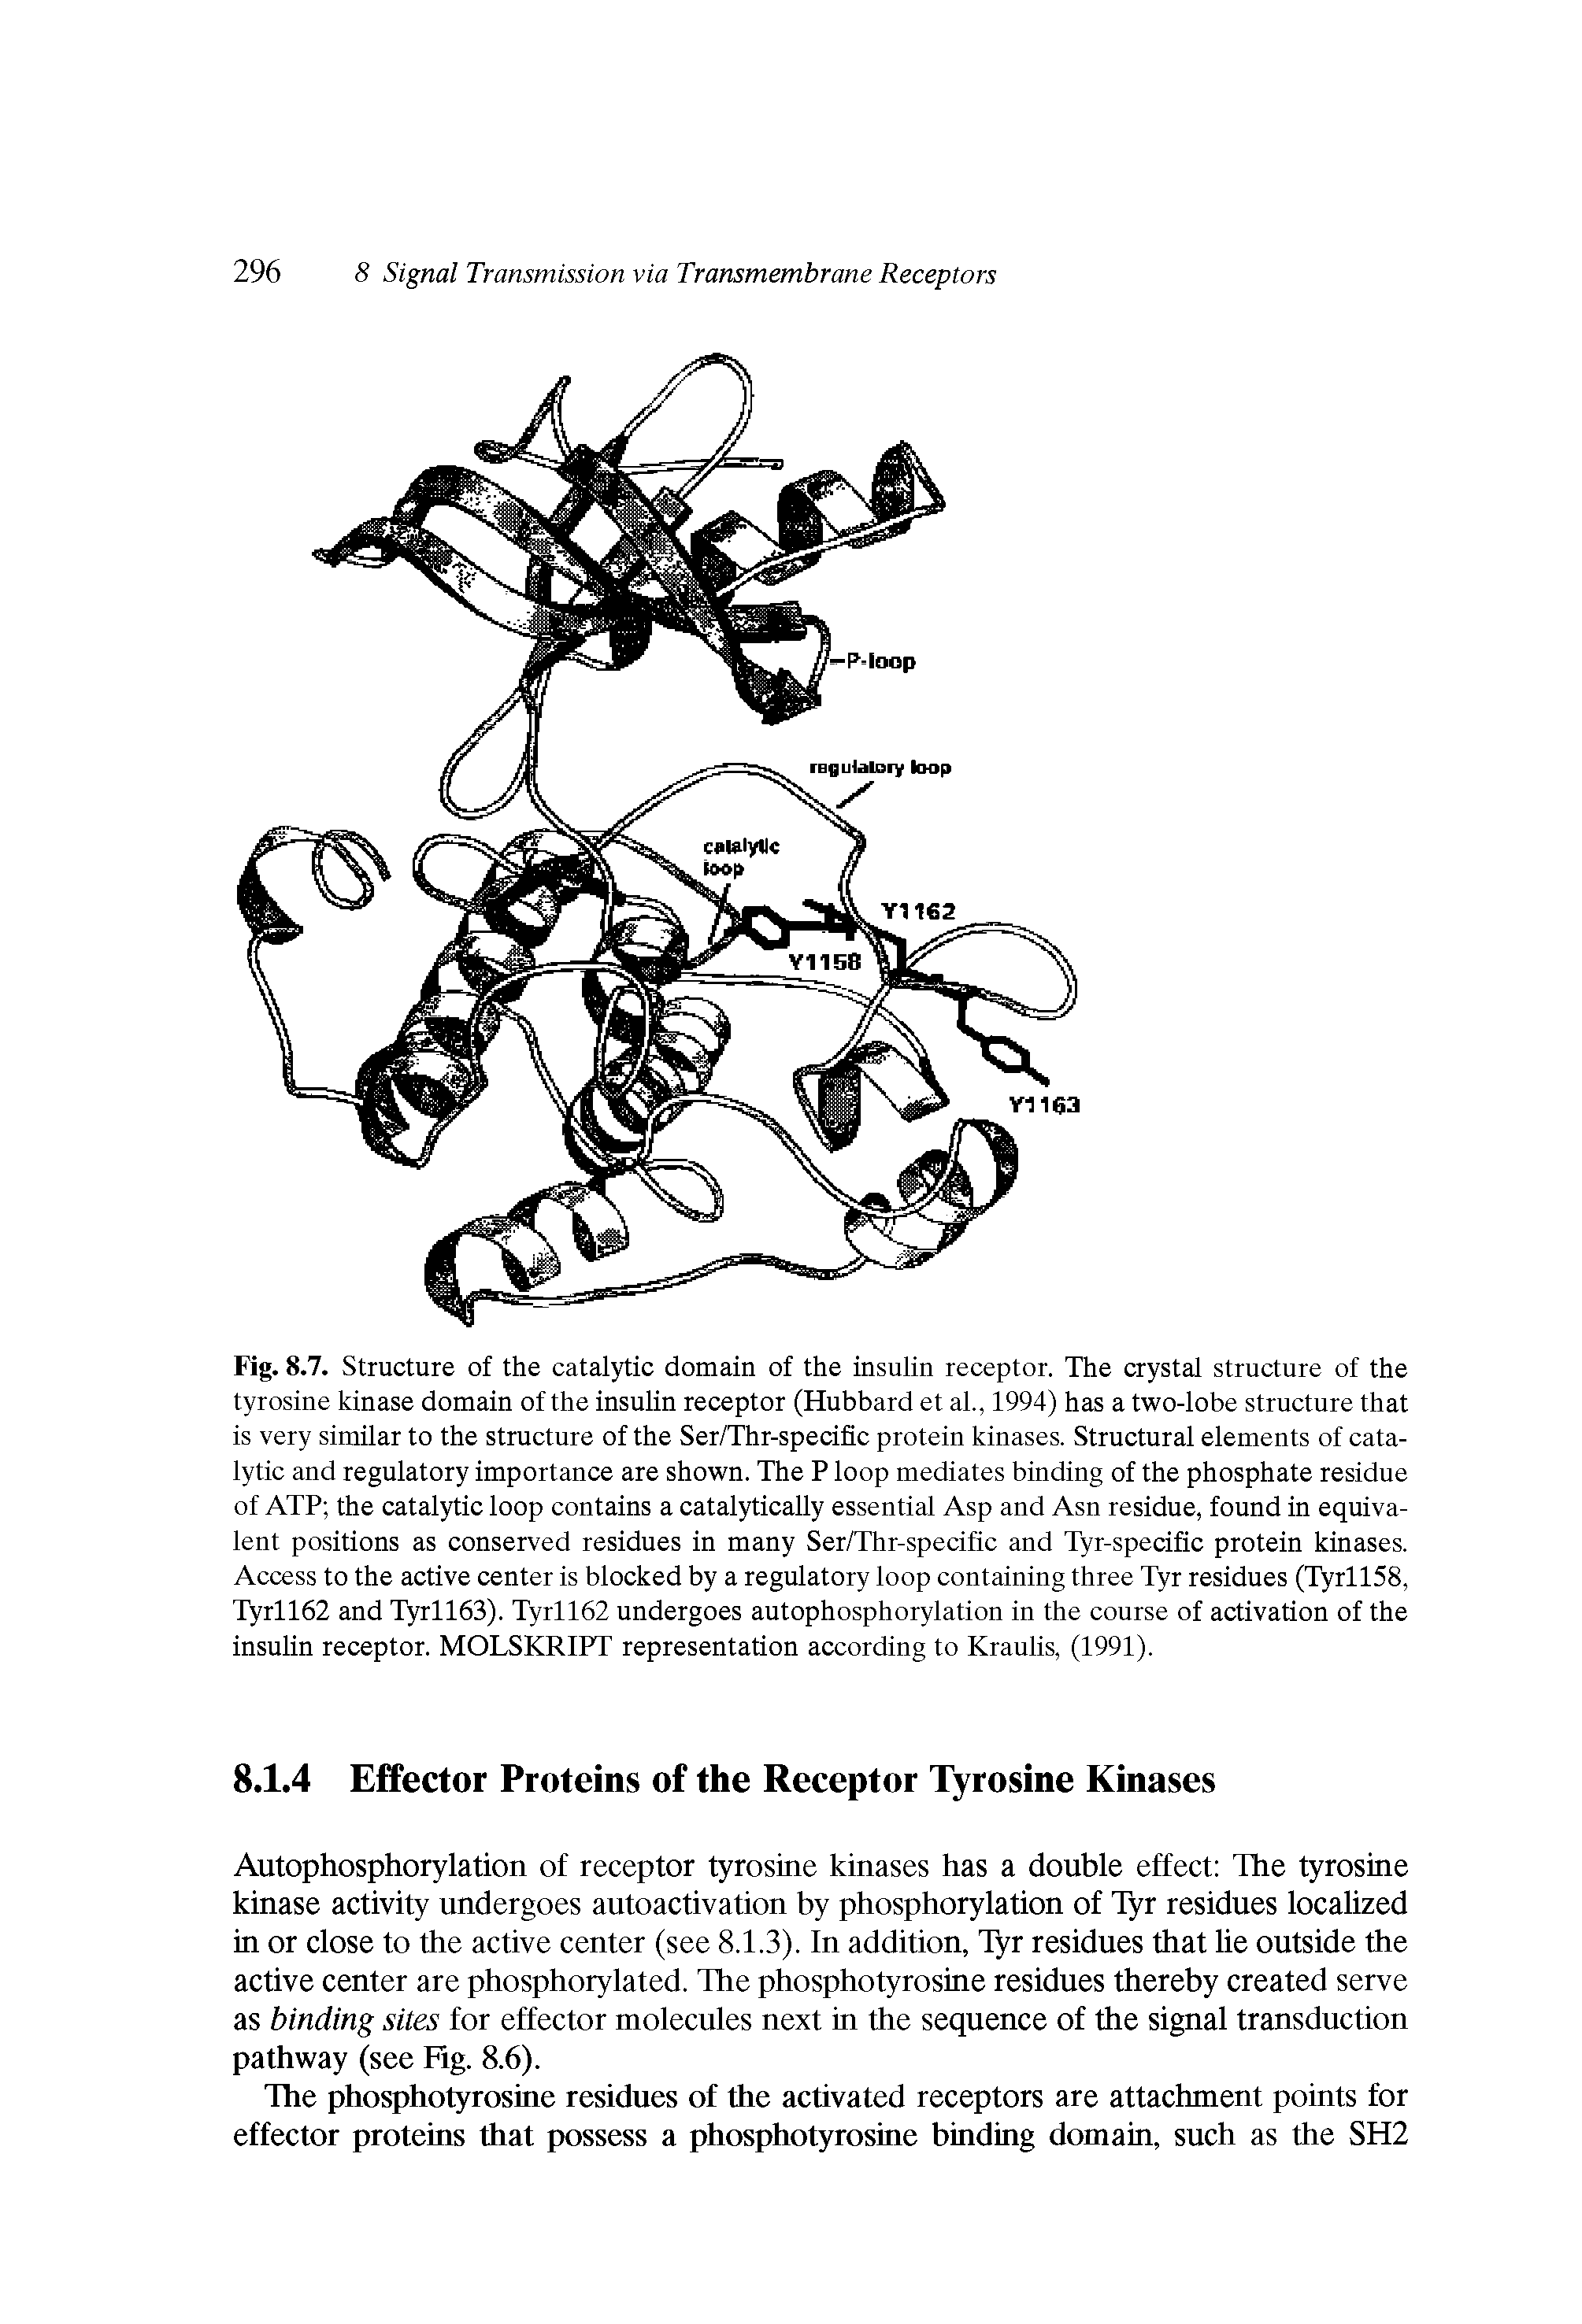 Fig. 8.7. Structure of the catalytic domain of the insulin receptor. The crystal structure of the tyrosine kinase domain of the insulin receptor (Hubbard et al., 1994) has a two-lobe structure that is very similar to the structure of the Ser/Thr-specific protein kinases. Structural elements of catalytic and regulatory importance are shown. The P loop mediates binding of the phosphate residue of ATP the catalytic loop contains a catalytically essential Asp and Asn residue, found in equivalent positions as conserved residues in many Ser/Thr-specific and Tyr-specific protein kinases. Access to the active center is blocked by a regulatory loop containing three Tyr residues (Tyrll58, Tyrll62 and Tyrll63). Tyrll62 undergoes autophosphorylation in the course of activation of the insulin receptor. MOLSKRIPT representation according to Kraulis, (1991).